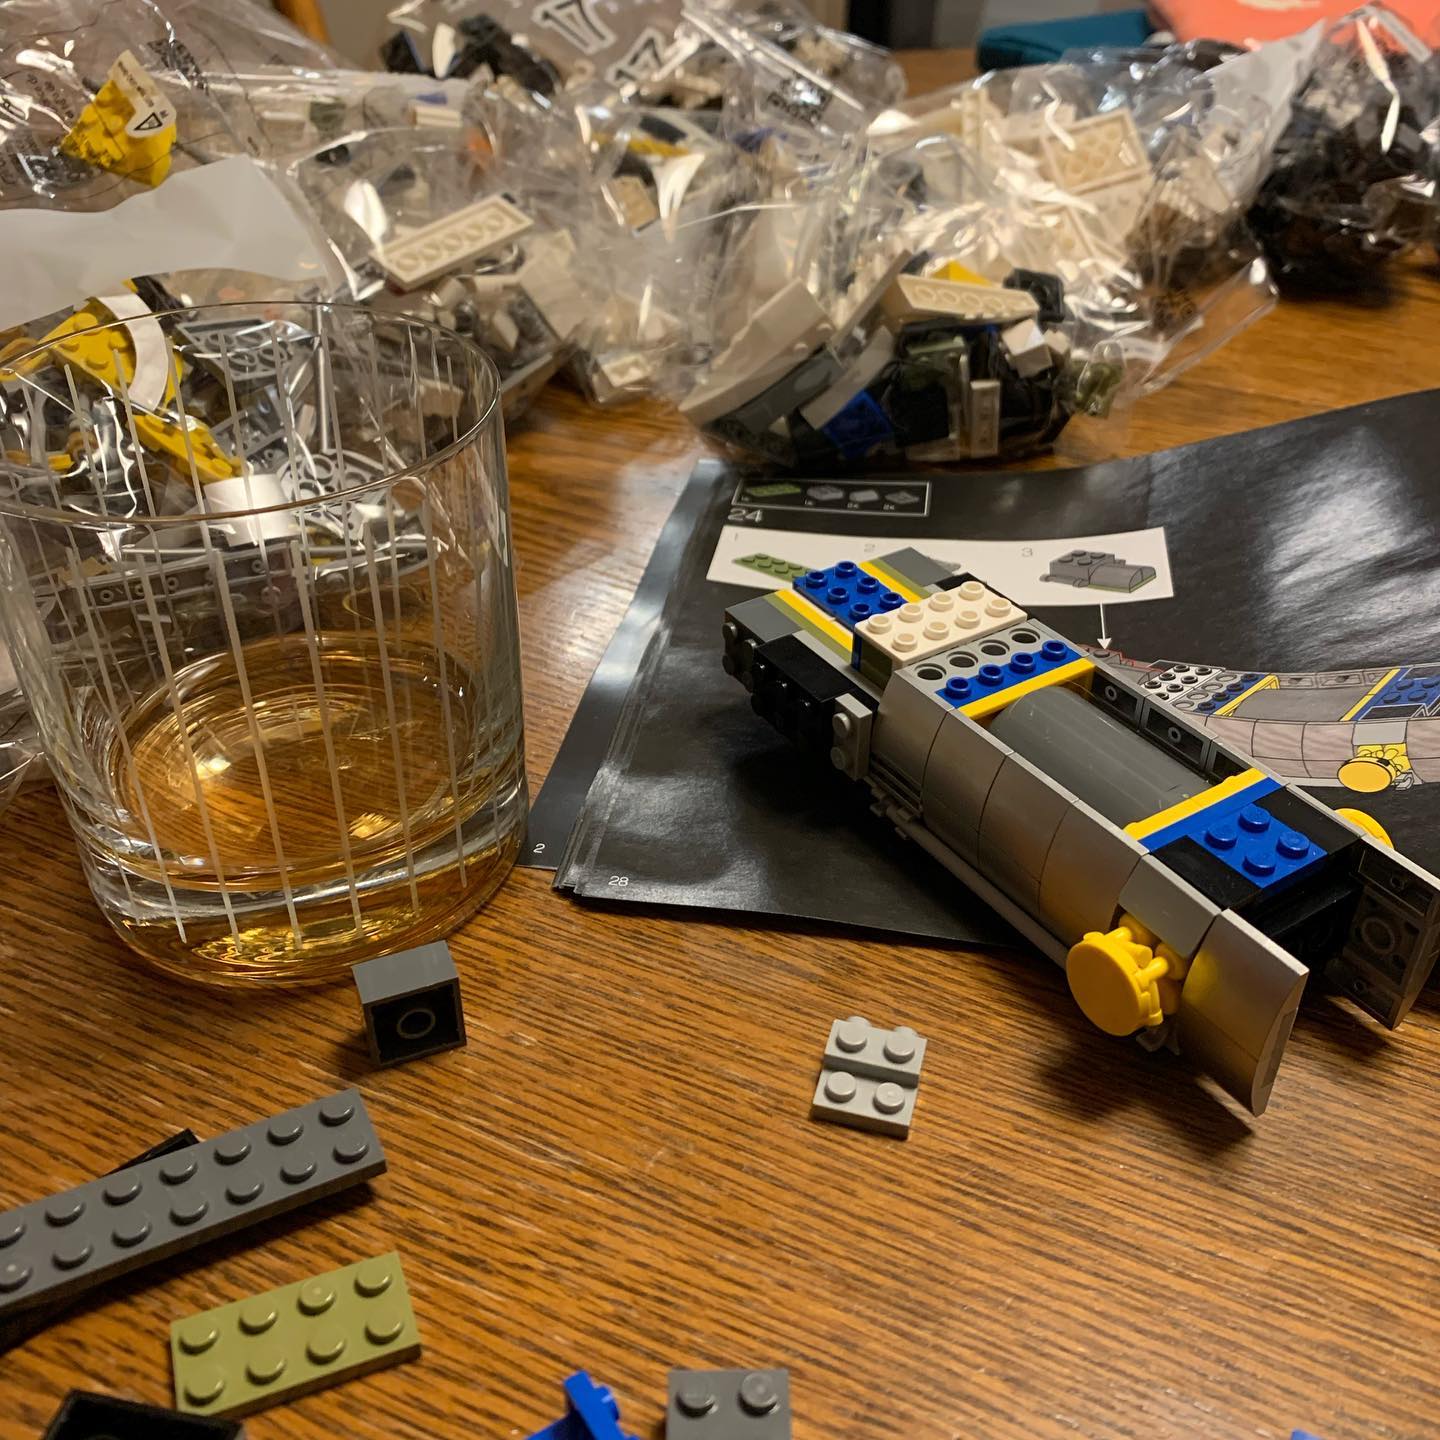 Adulting so hard on a Friday evening. Whisky and Lego. My wonderful and lovely wife got me the new @lego Space Shuttle with Hubble telescope. #adult #lego #whisky